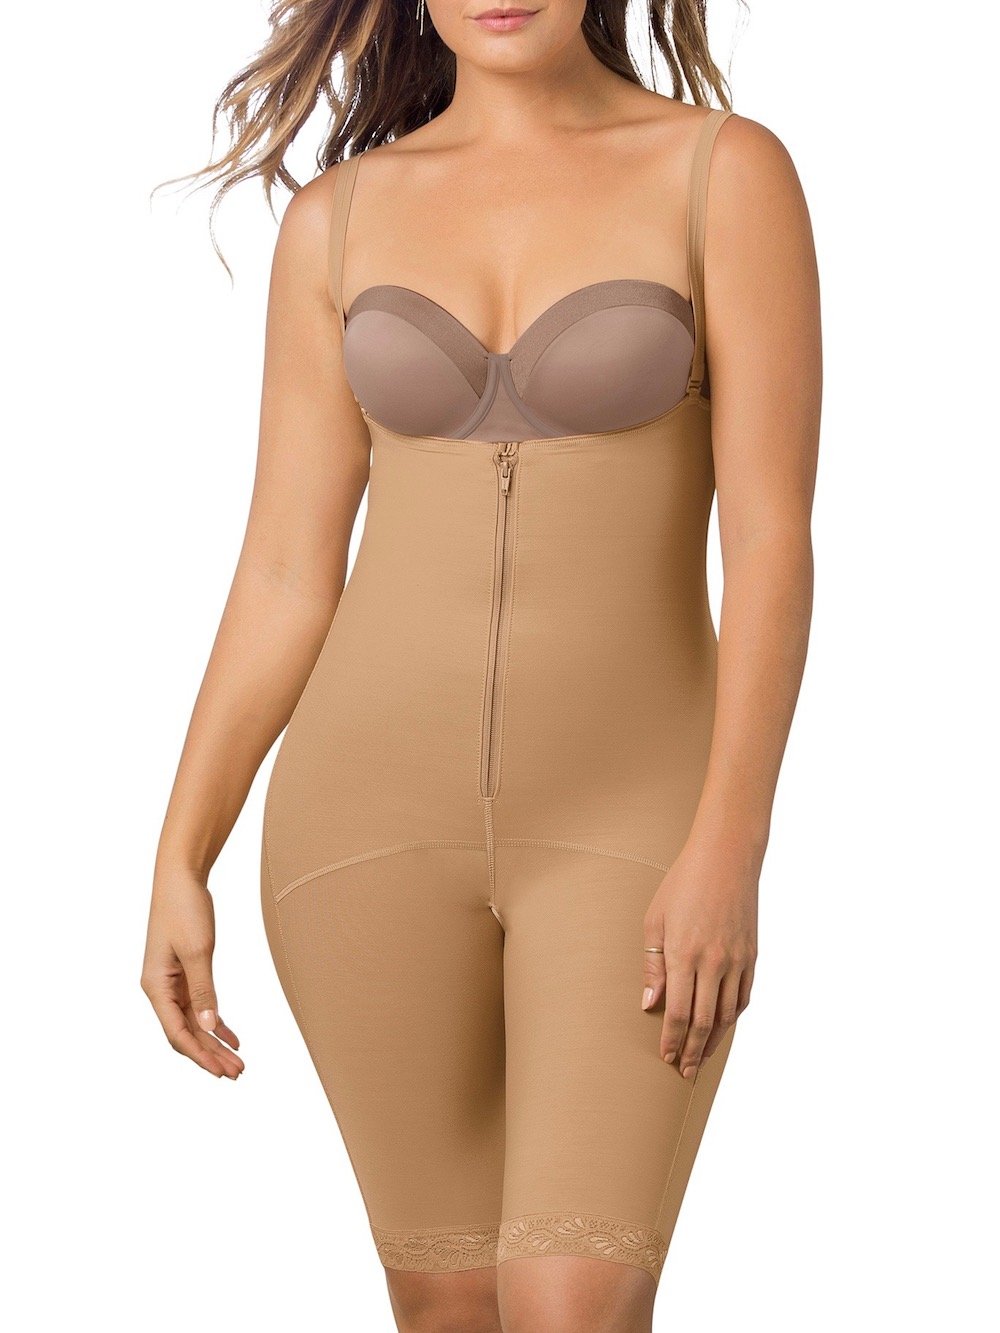 The power of the female form: why shapewear still has a part to